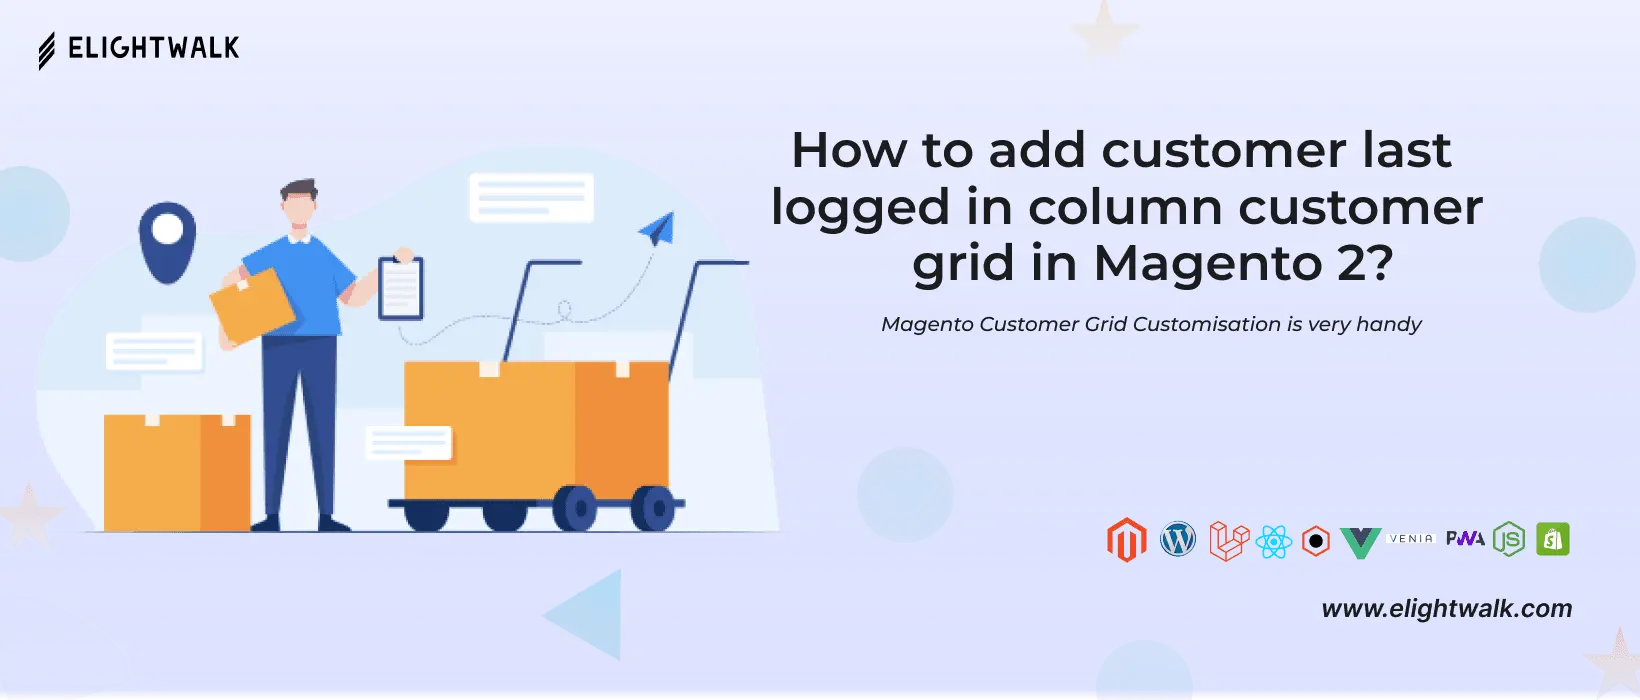 How to add customer last logged in column customer grid in Magento 2?